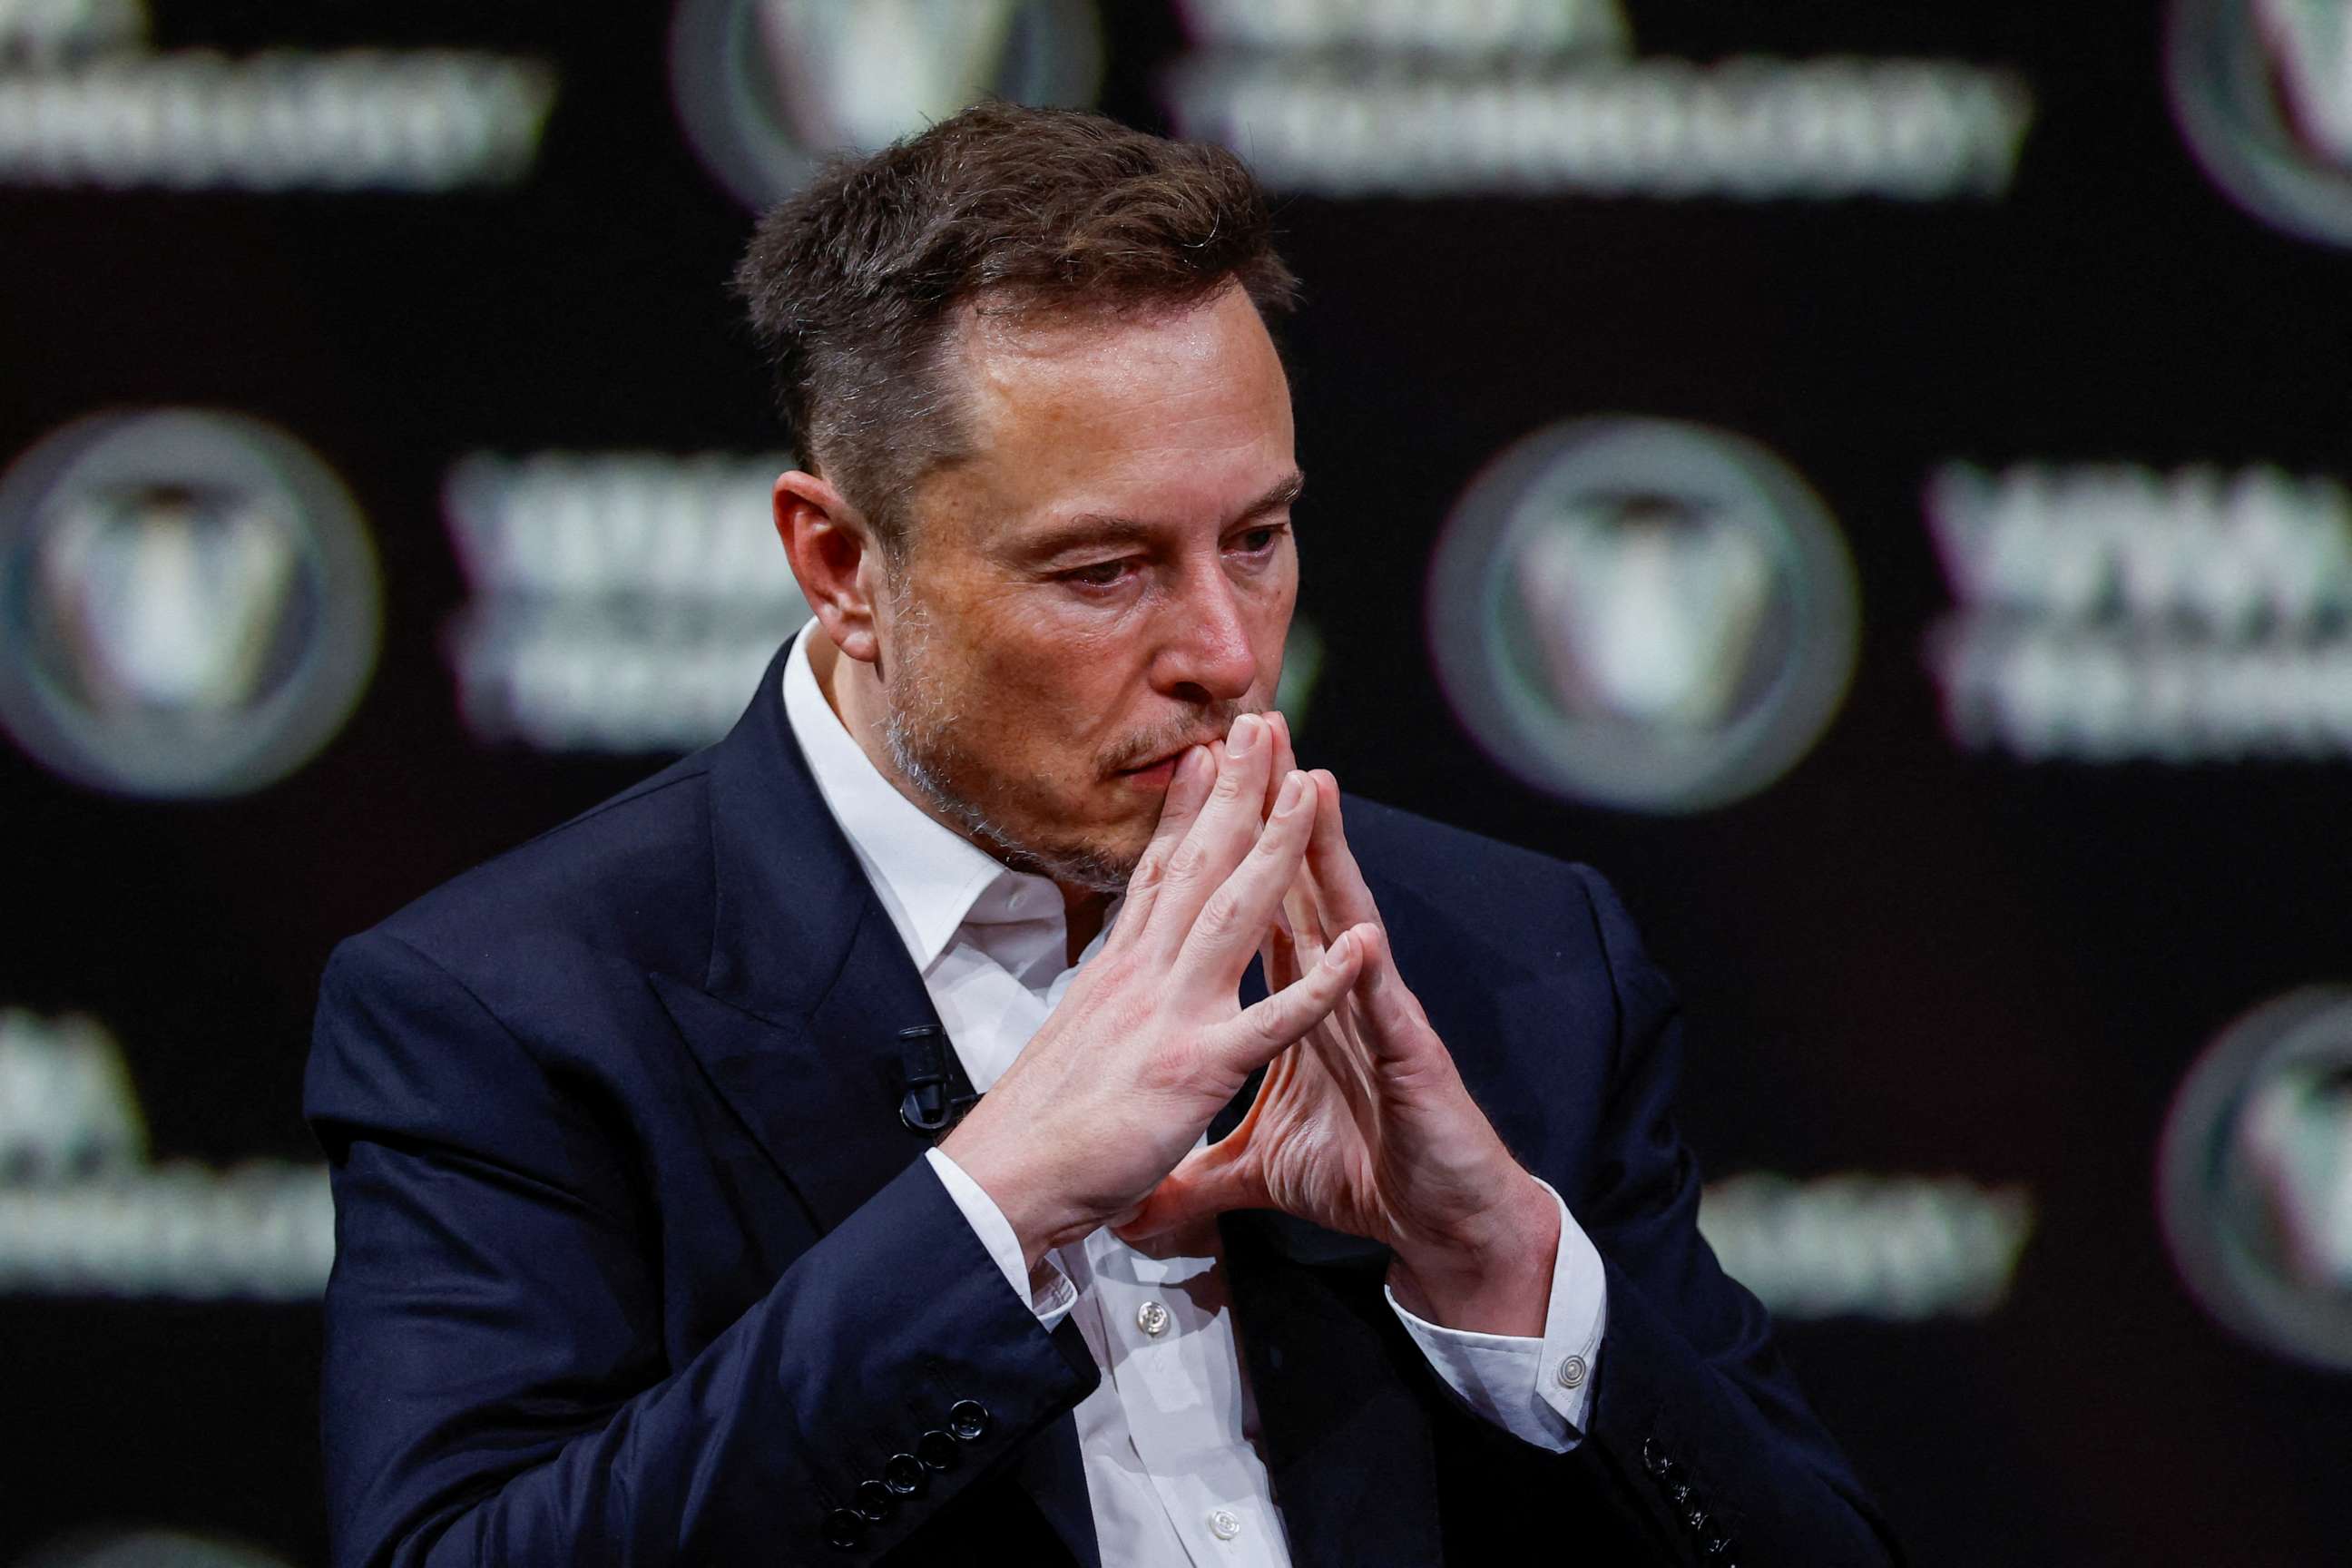 FILE PHOTO: Elon Musk, Chief Executive Officer of SpaceX and Tesla and owner of Twitter, gestures as he attends the Viva Technology conference dedicated to innovation and startups in Paris, France, June 16, 2023. REUTERS/Gonzalo Fuentes/File Photo